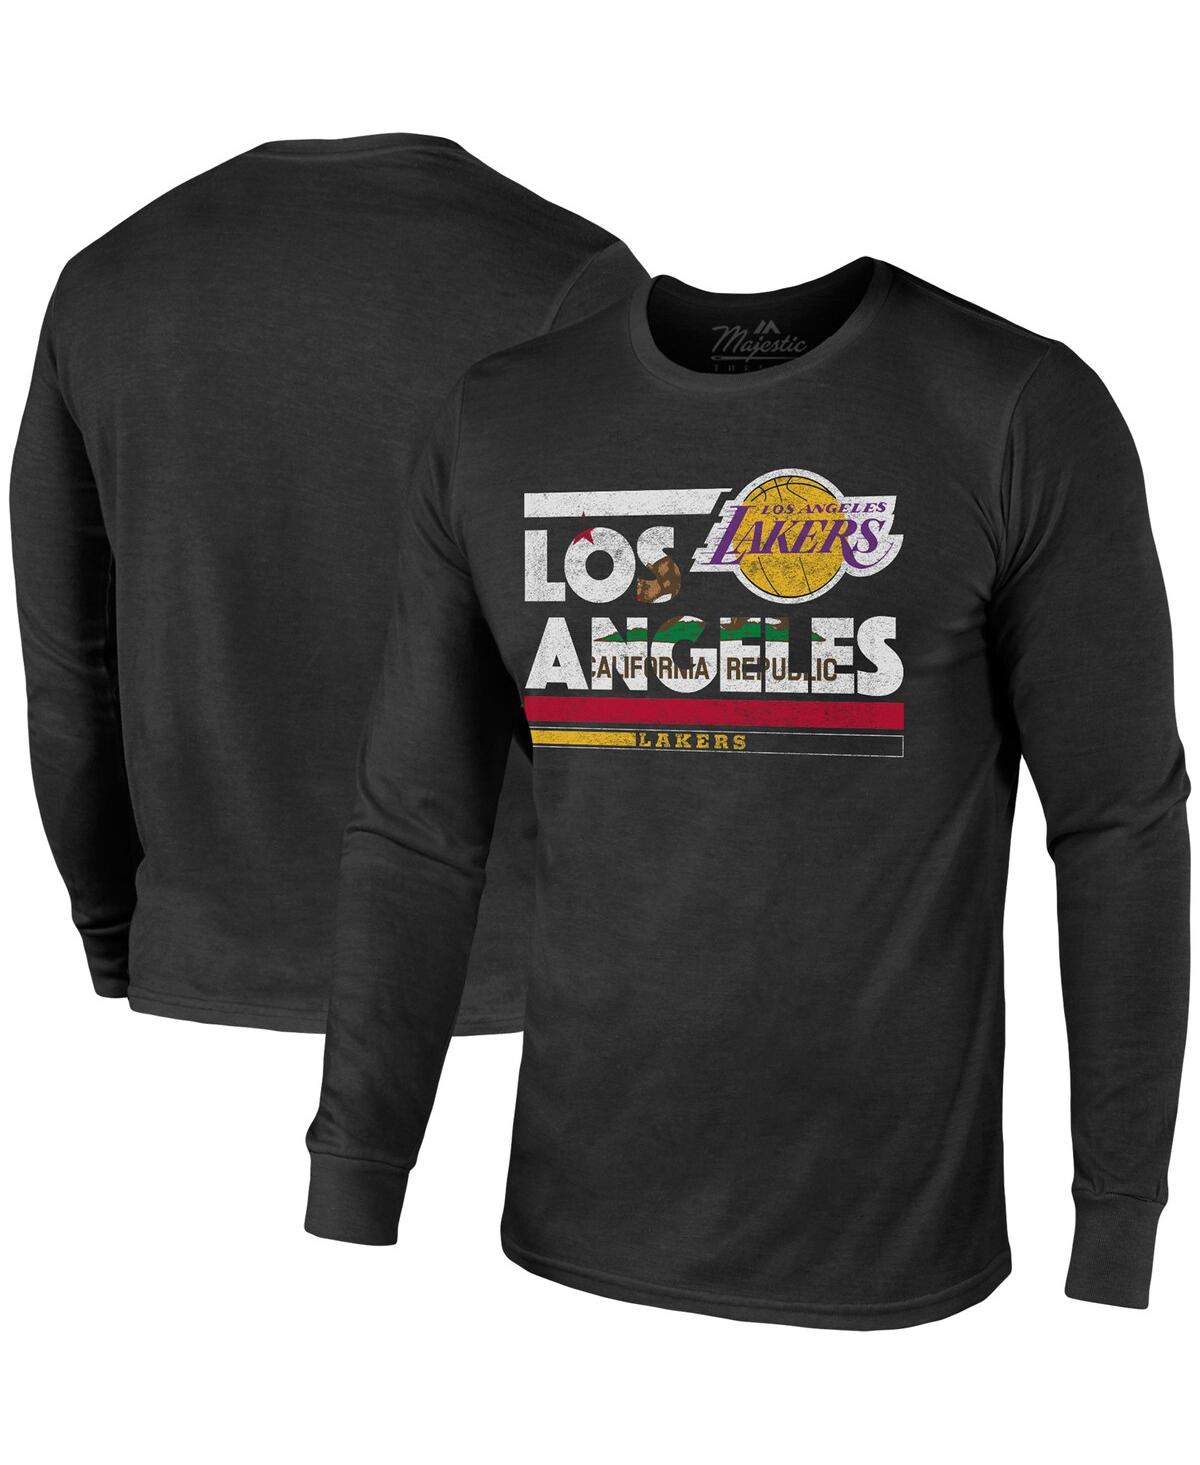 Shop Majestic Men's  Threads Black Los Angeles Lakers City And State Tri-blend Long Sleeve T-shirt